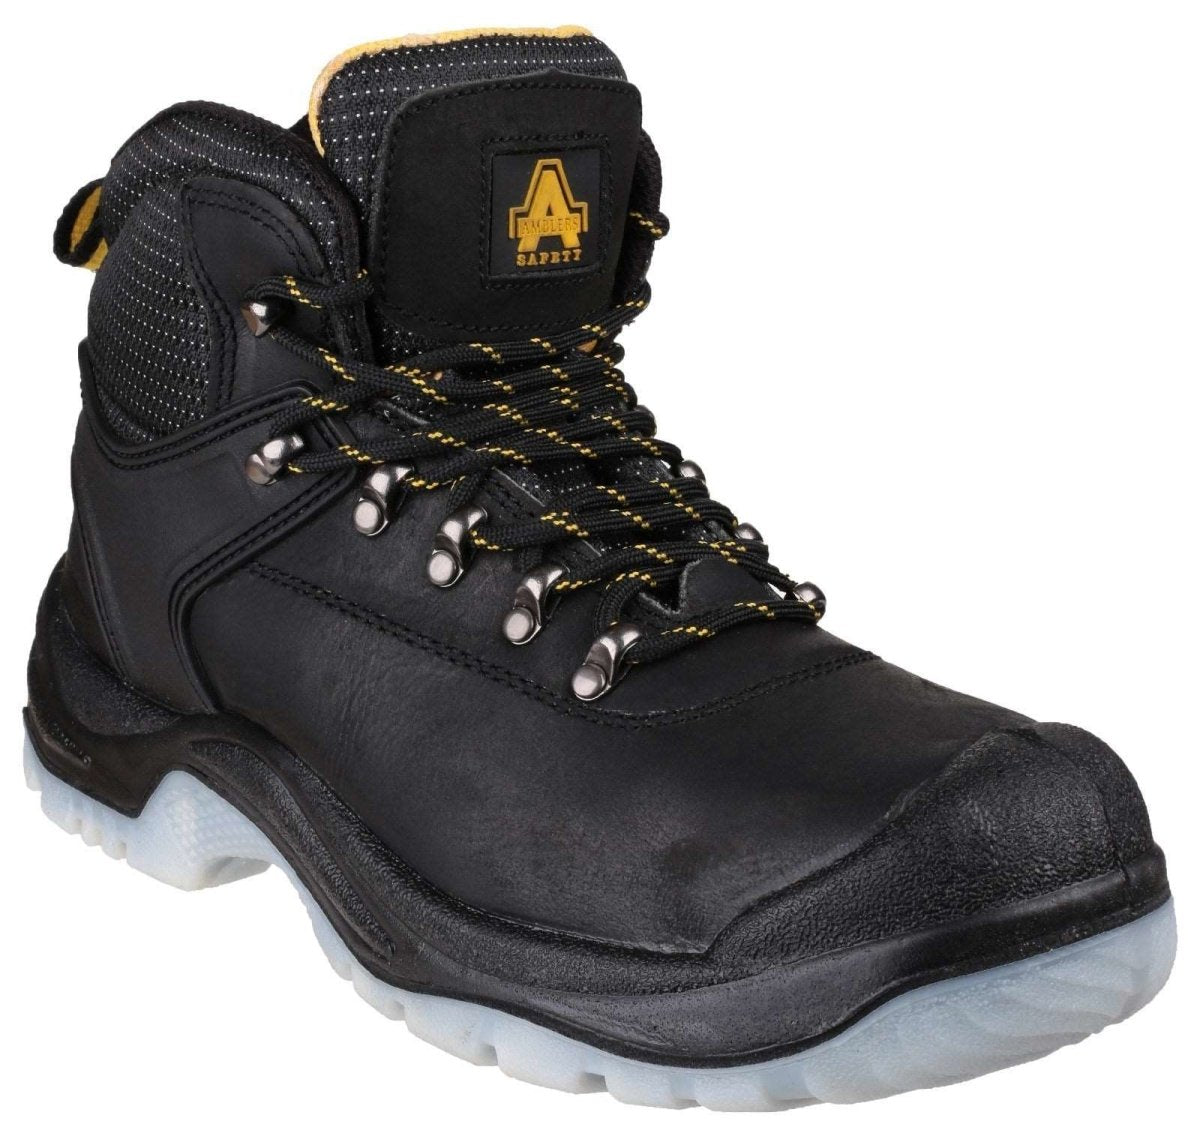 Amblers FS199 Antistatic Hiker Safety Boots - Shoe Store Direct